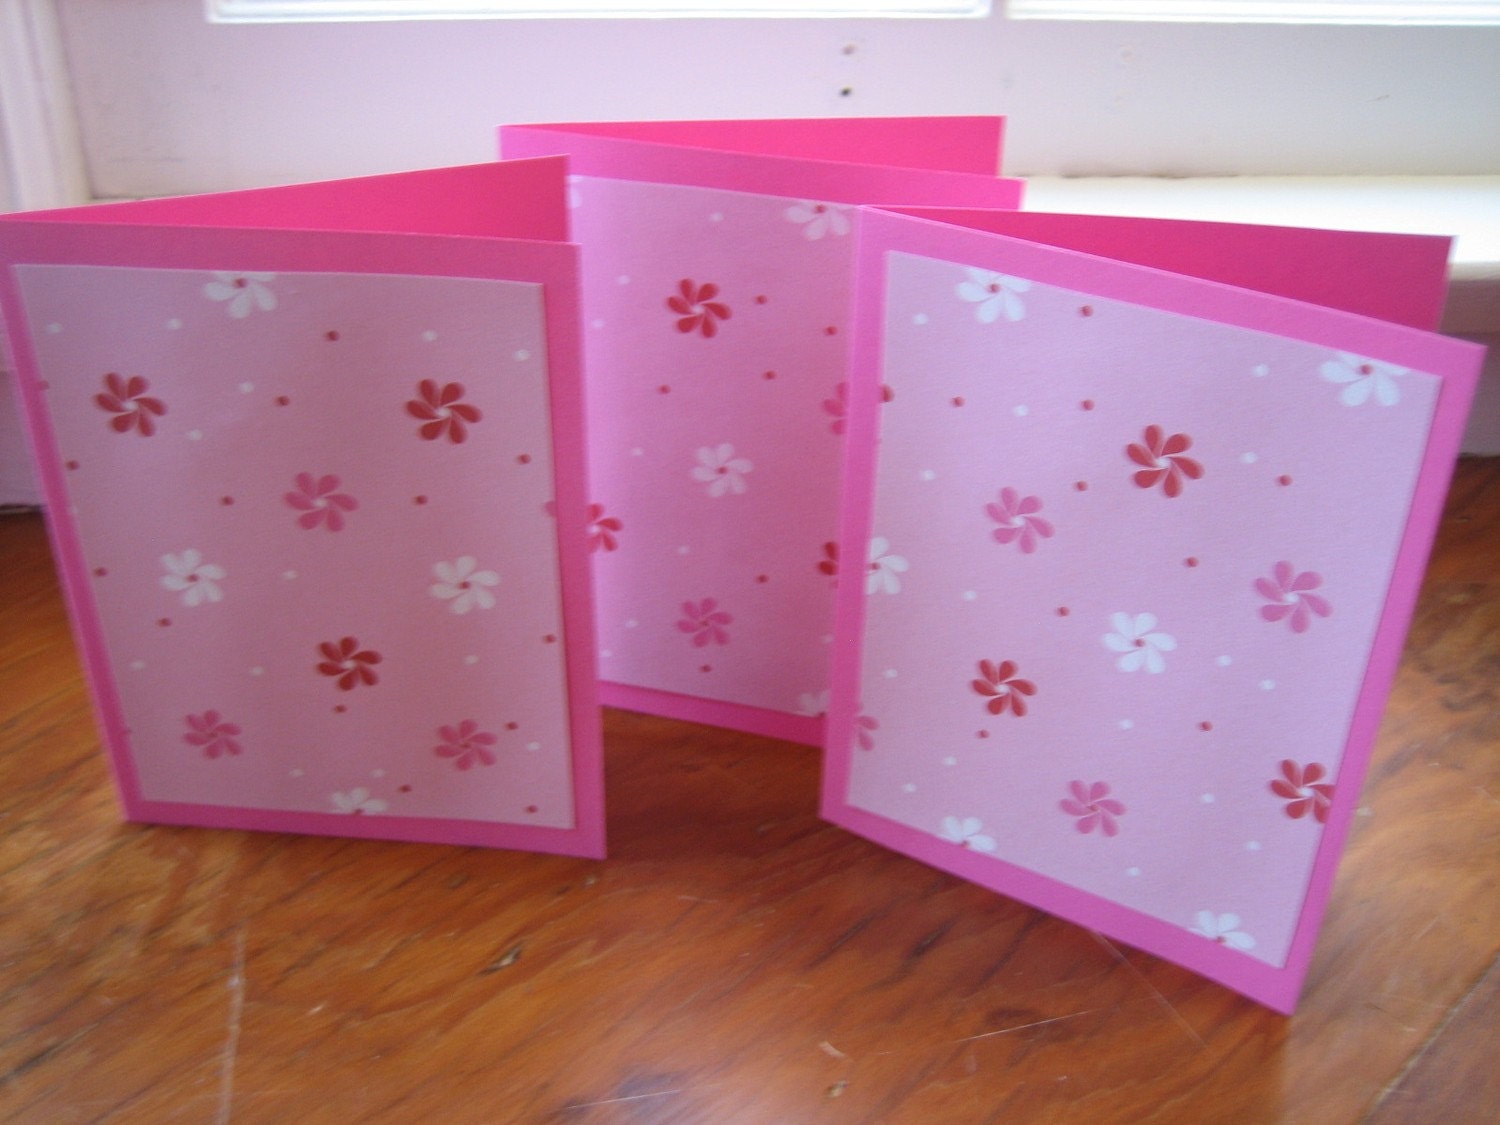 SALE - Flower Shimmer Greeting Cards - Set of Three